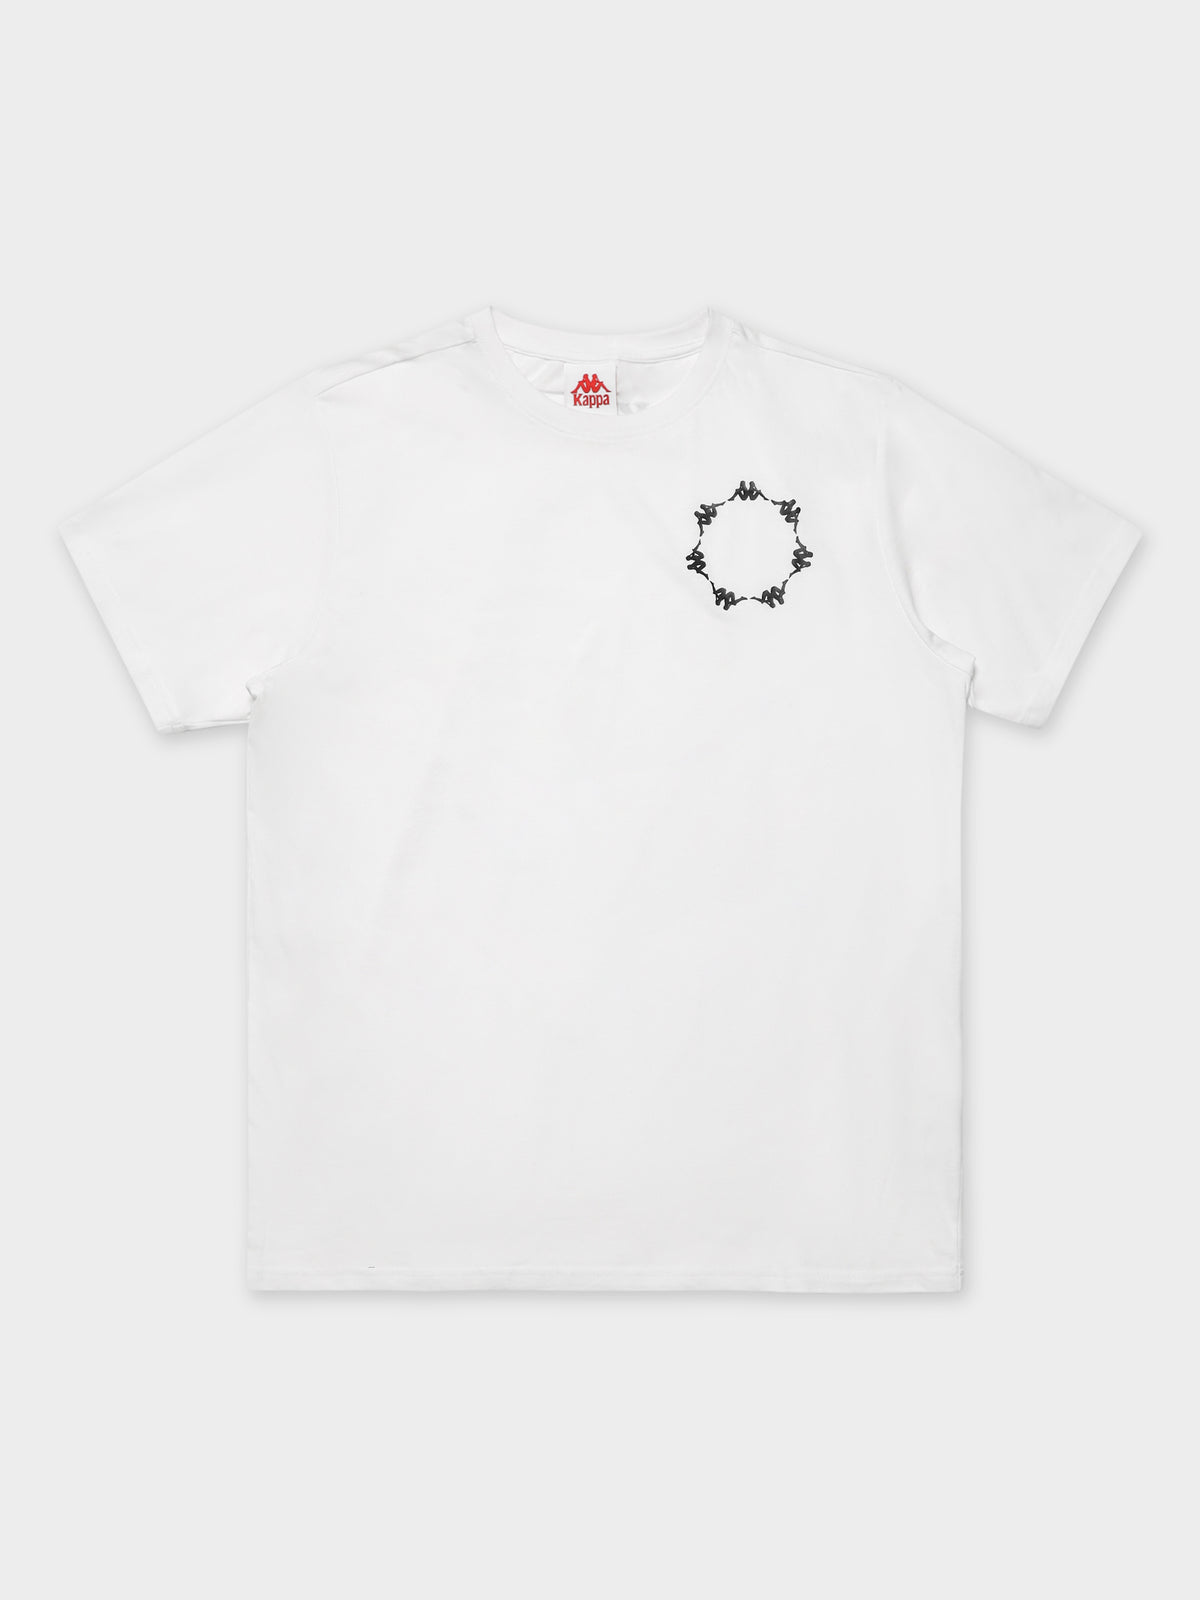 Authentic Fedi T-Shirt in White